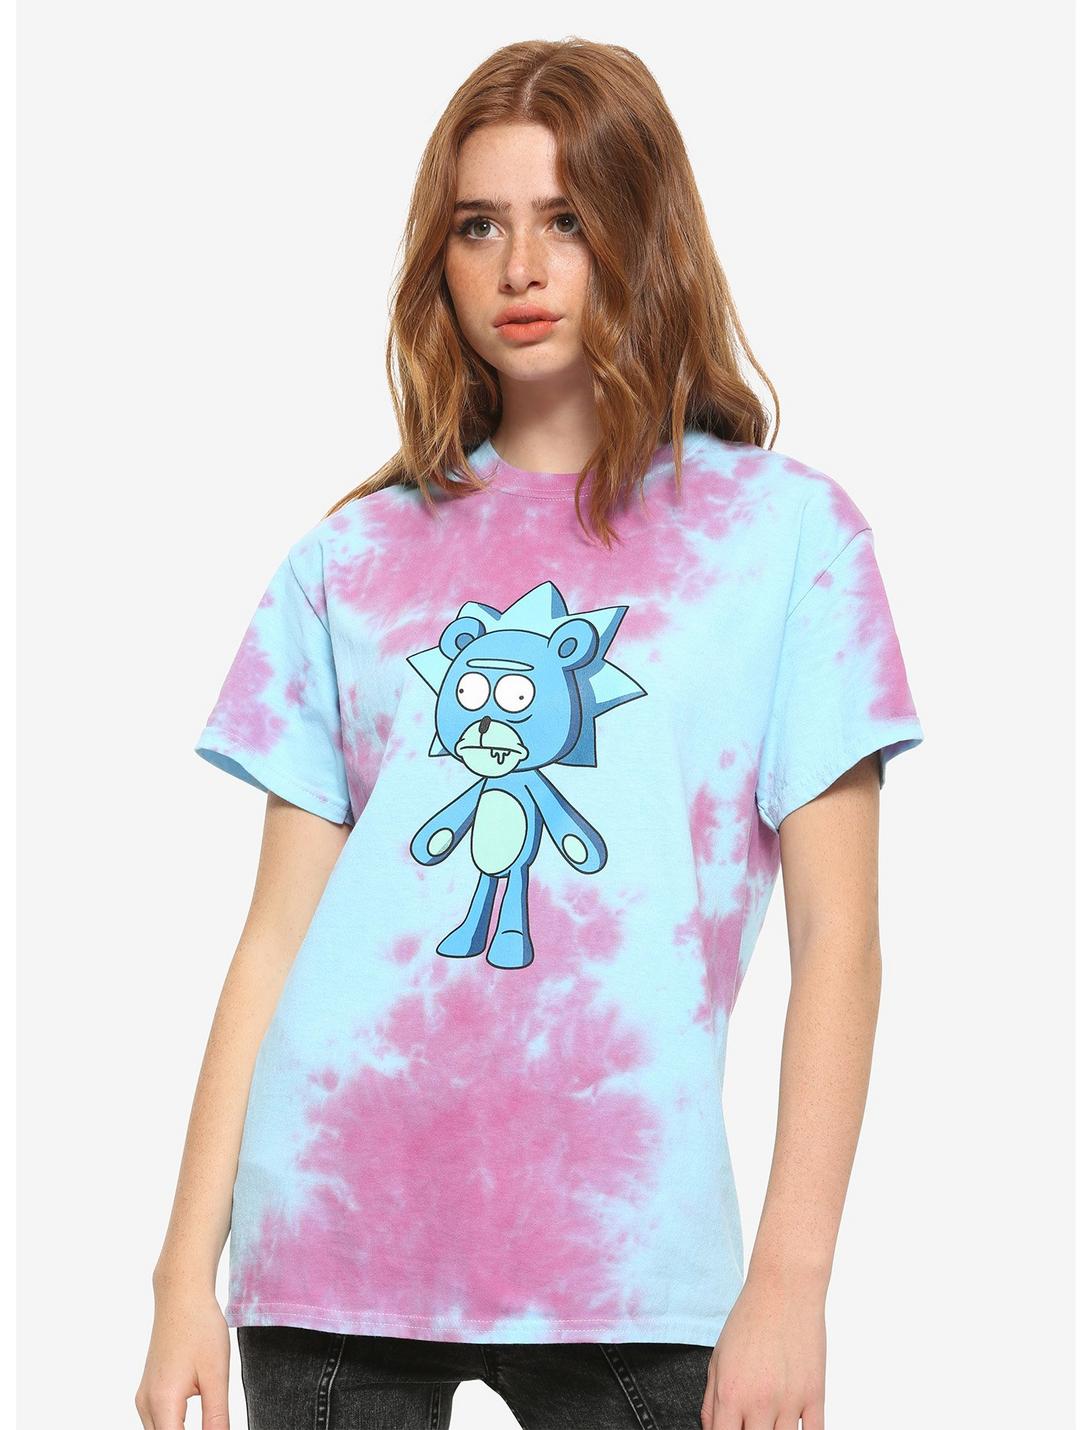 Rick And Morty Teddy Rick Tie-Dye Girls T-Shirt, PINK, hi-res